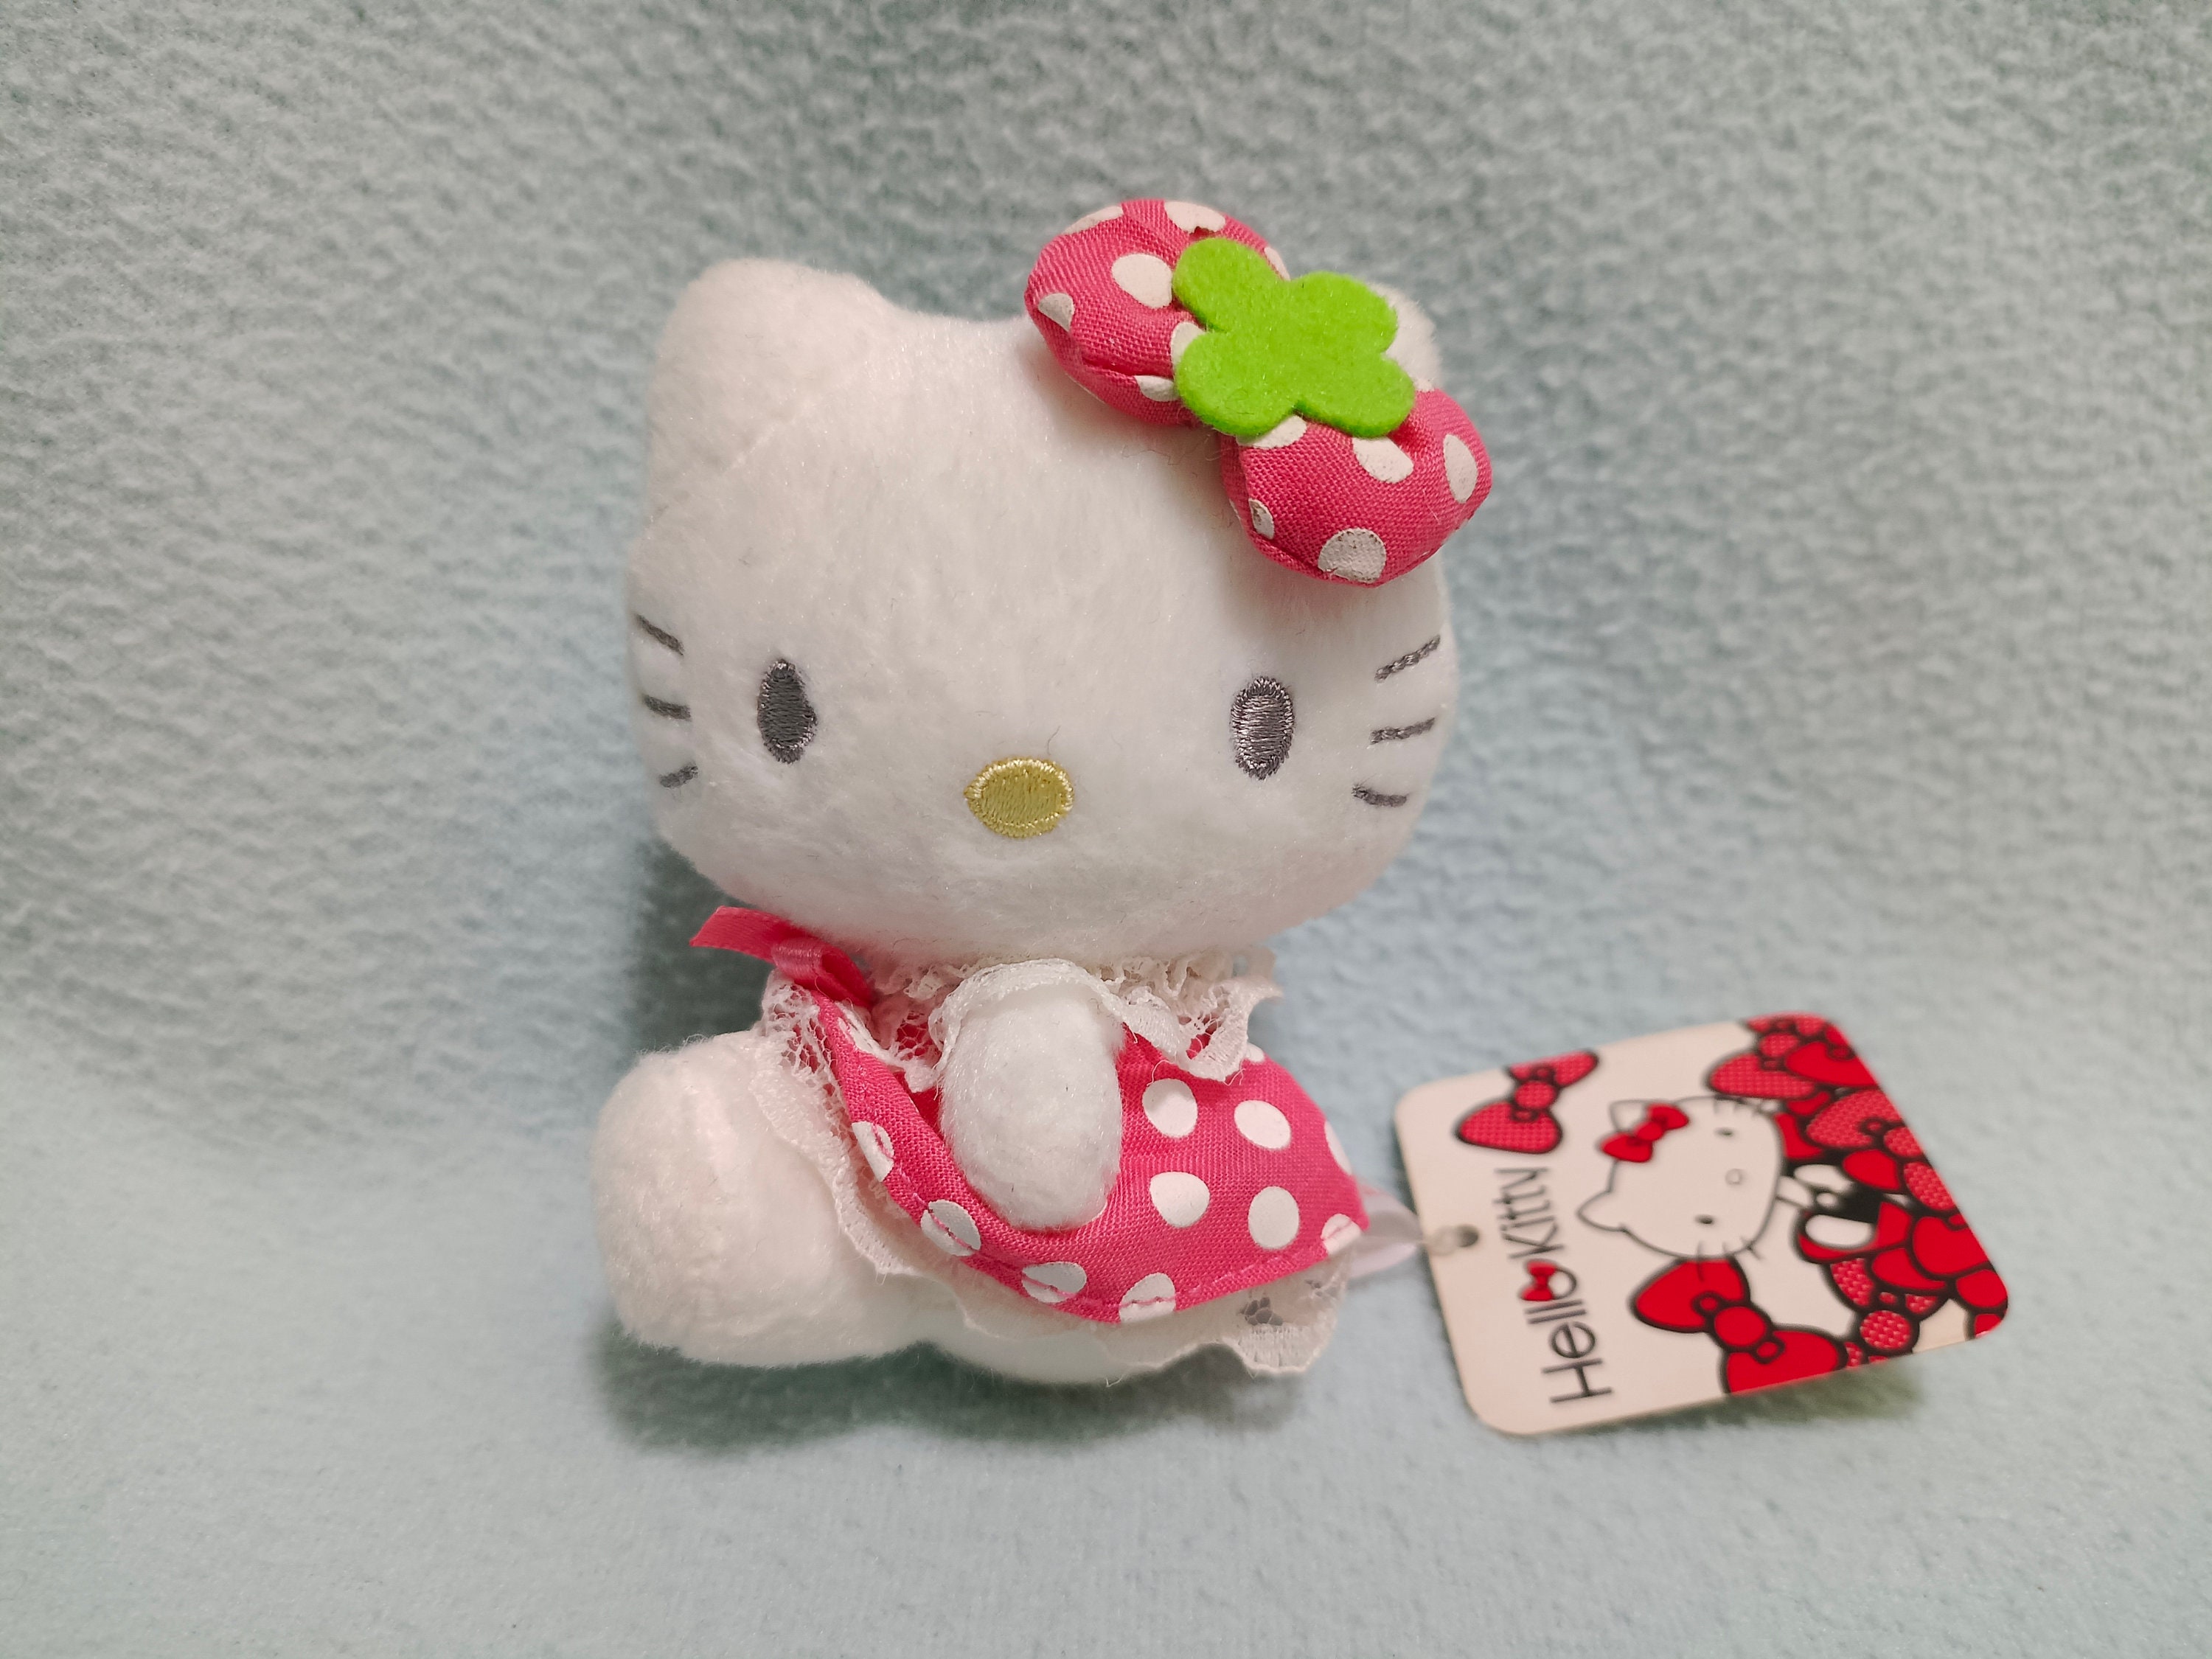 Vintage 1994 Sanrio Hello Kitty Red Pencil Case with Teddy Bears